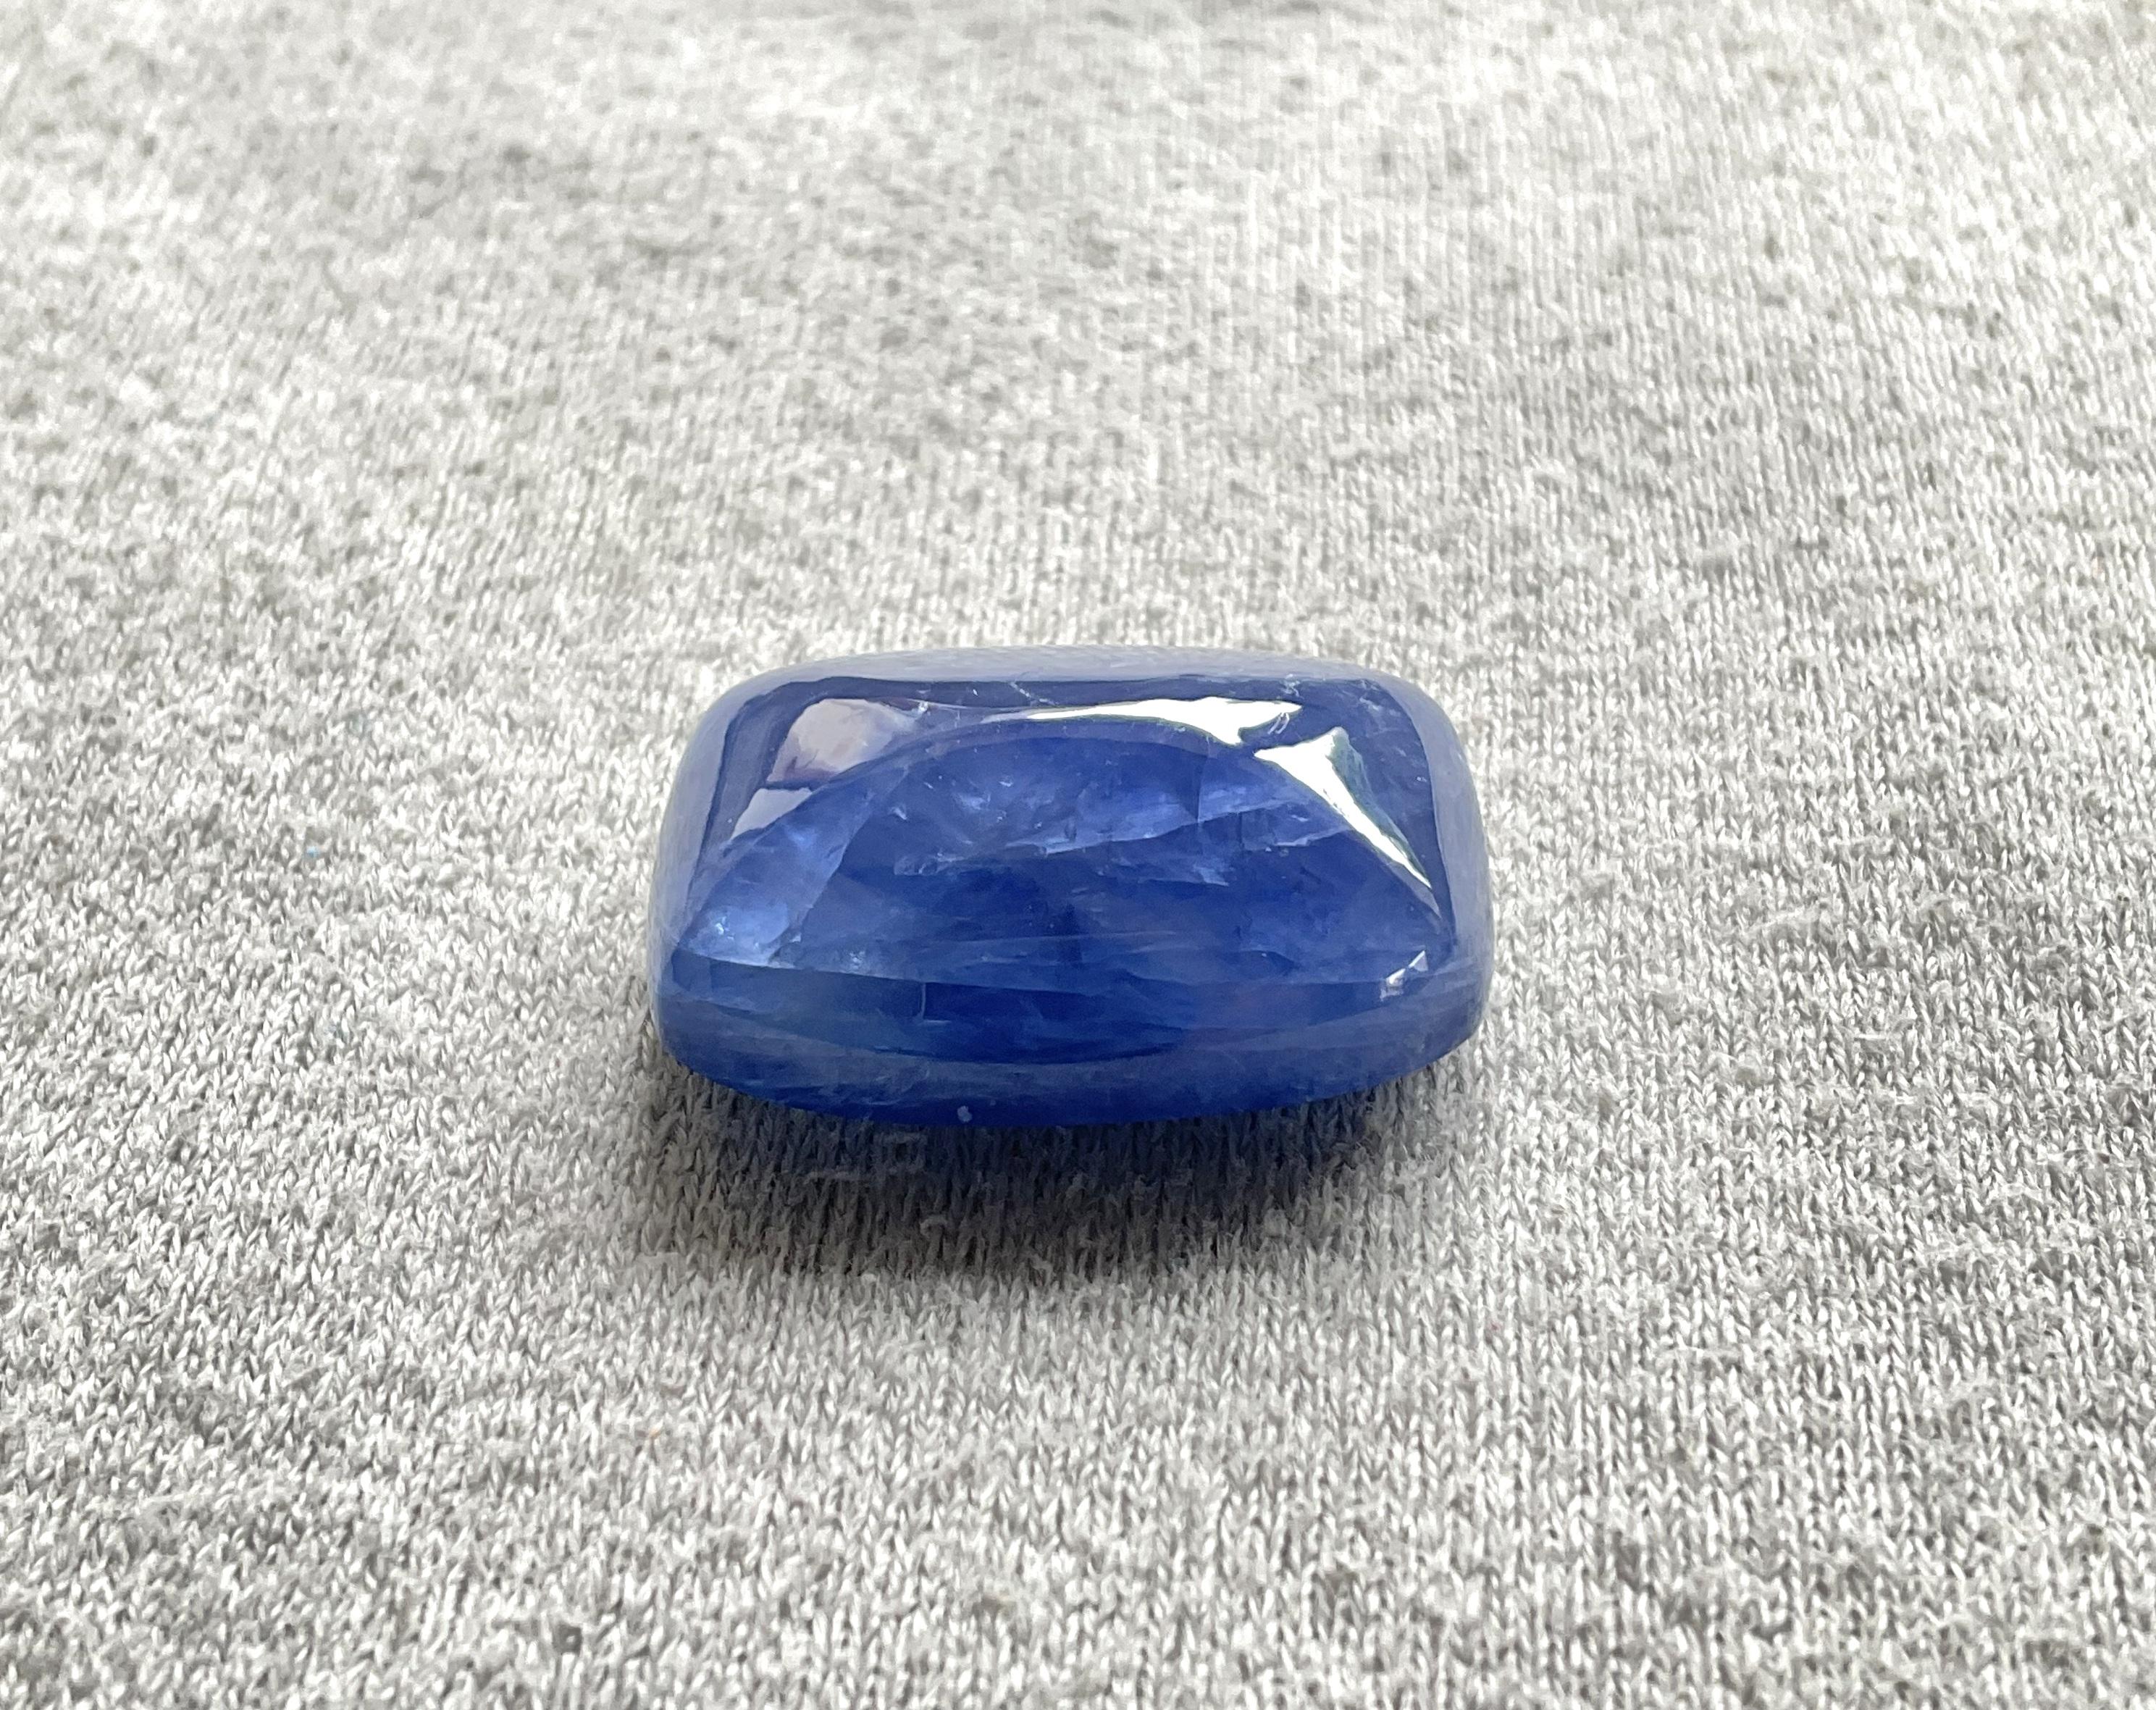 Women's or Men's 41.73 Carats Burmese Sapphire Cabochon Sugarloaf No-Heat Top Quality Natural Gem For Sale